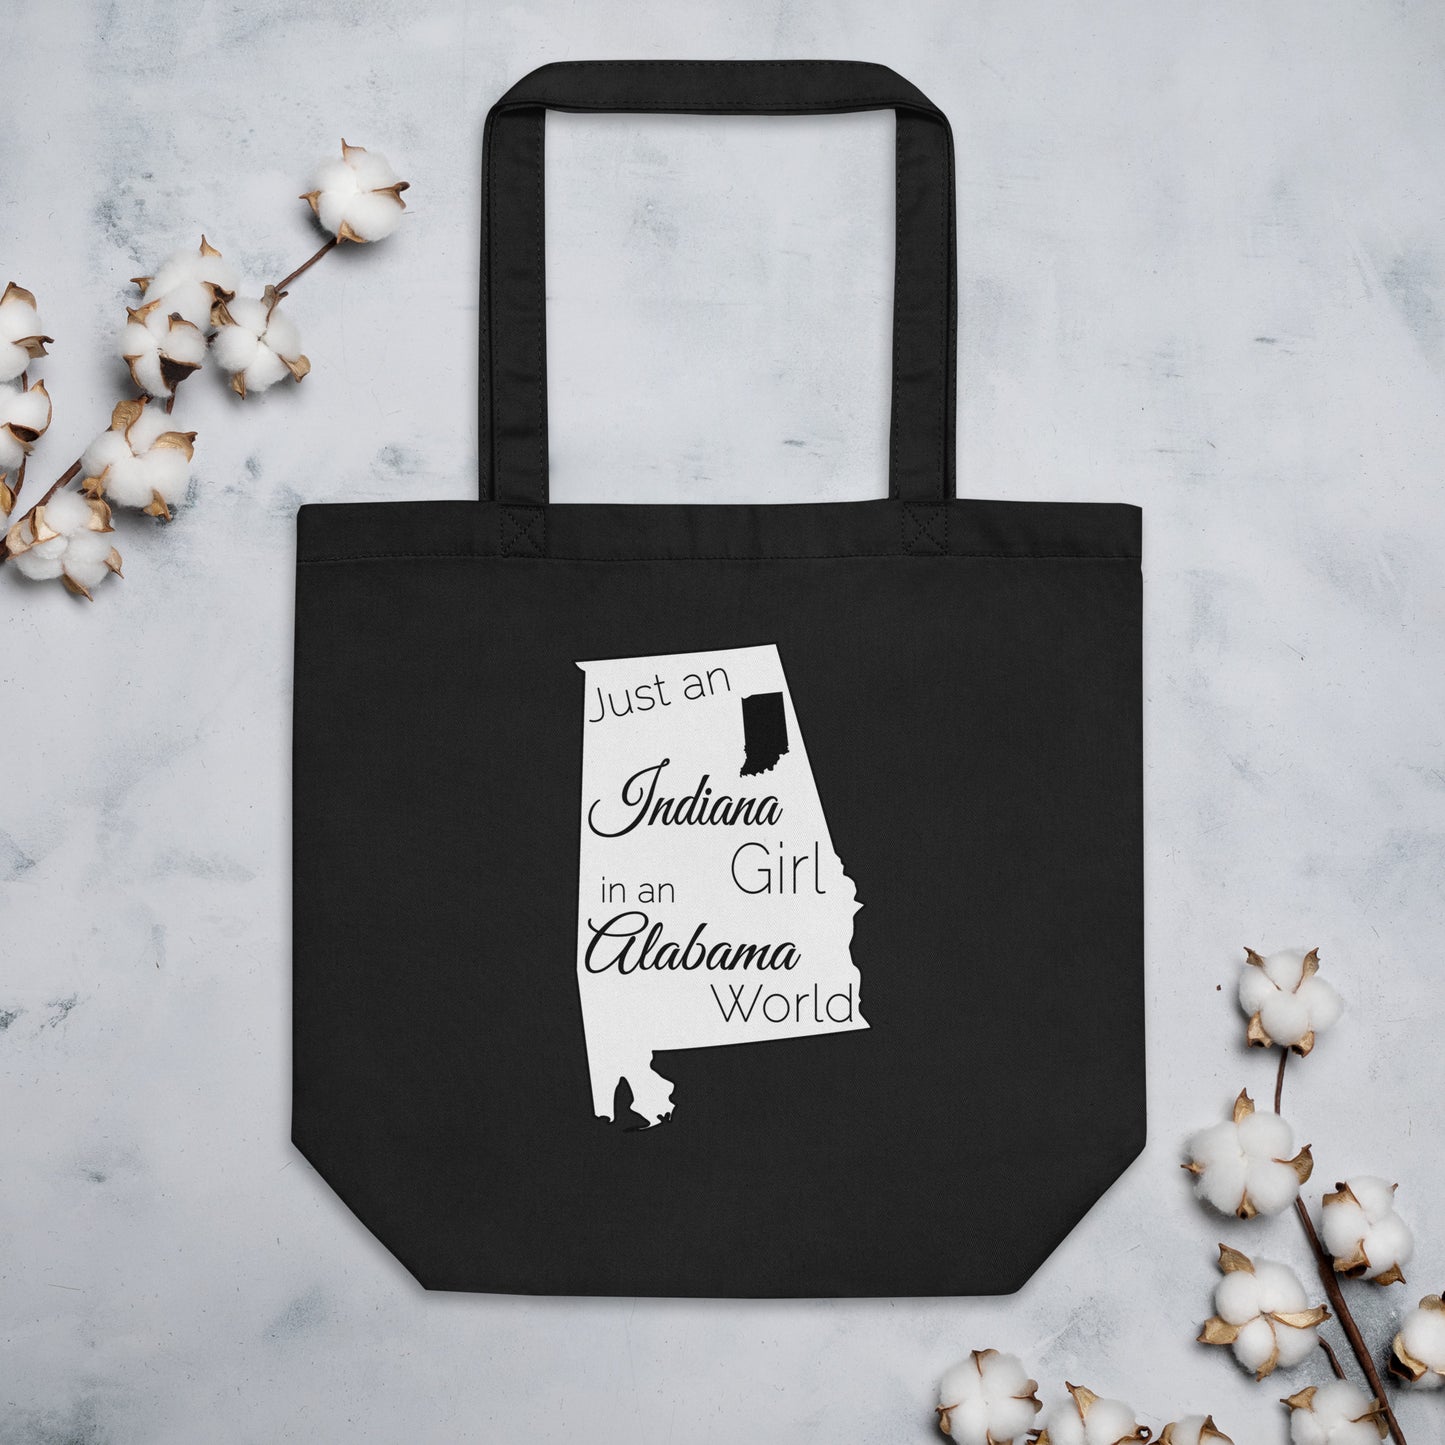 Just an Indiana Girl in an Alabama World Eco Tote Bag